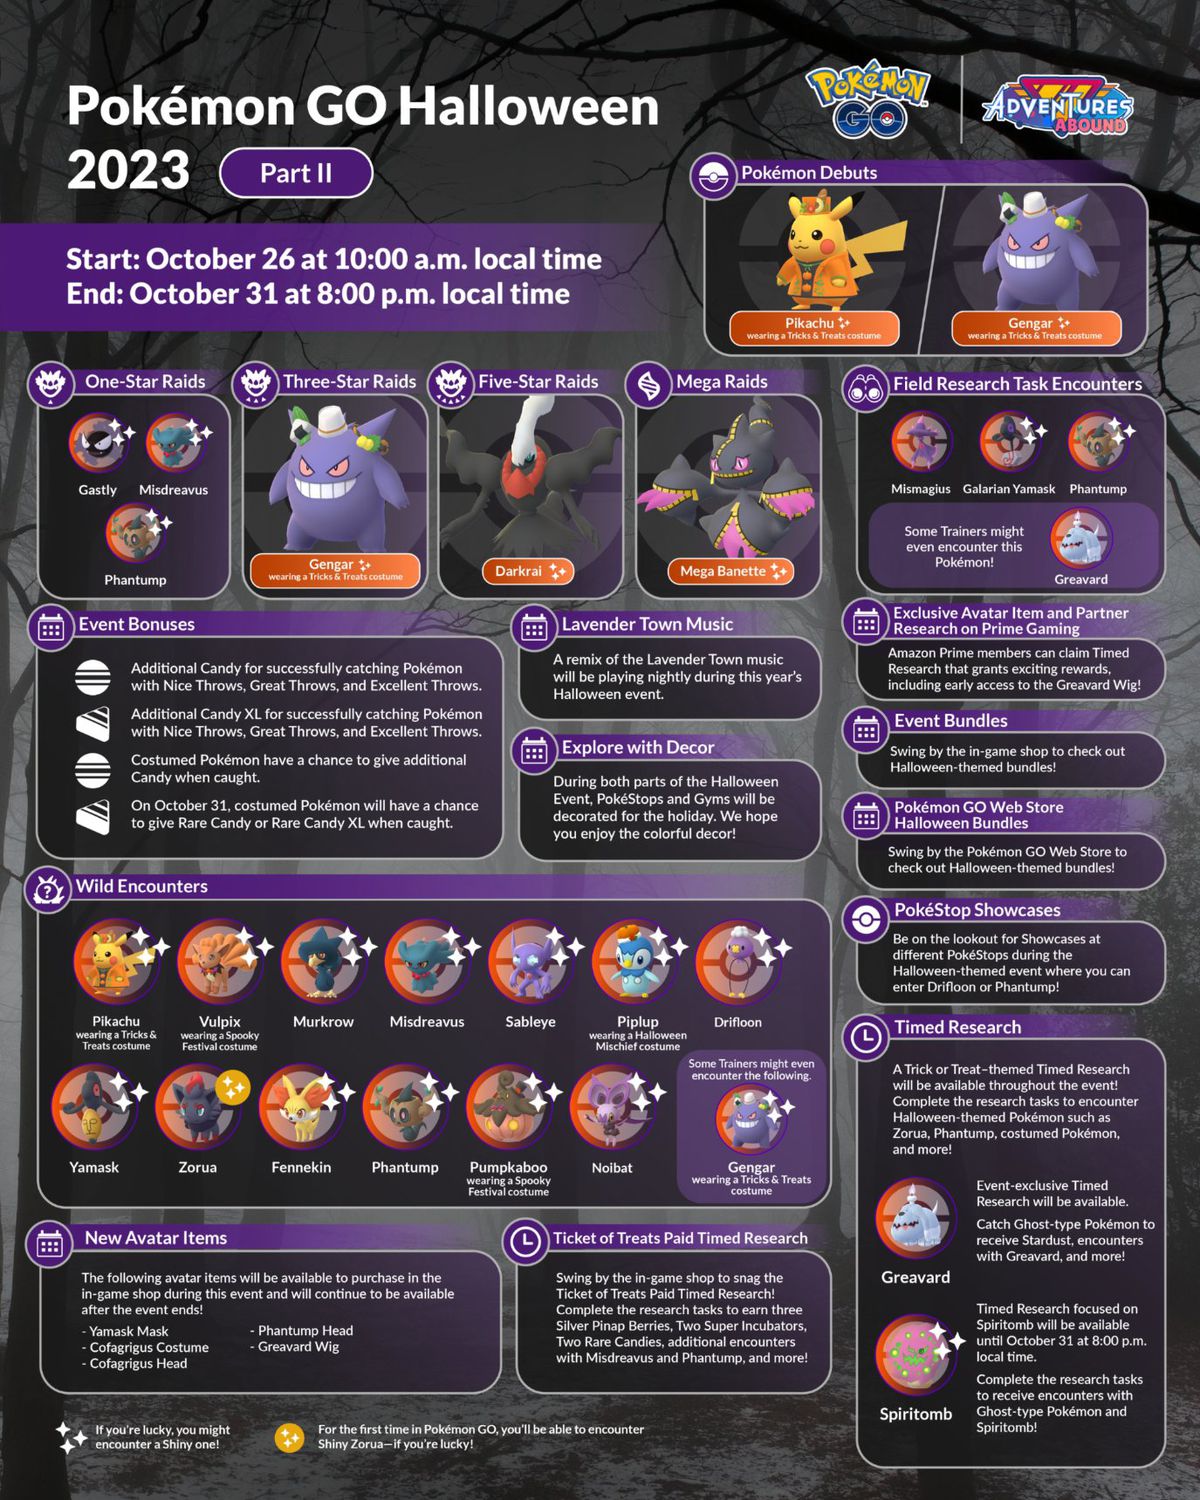 A huge infographic for Pokémon Go’s Halloween event, detailing spawns, debuts, and other bonuses.